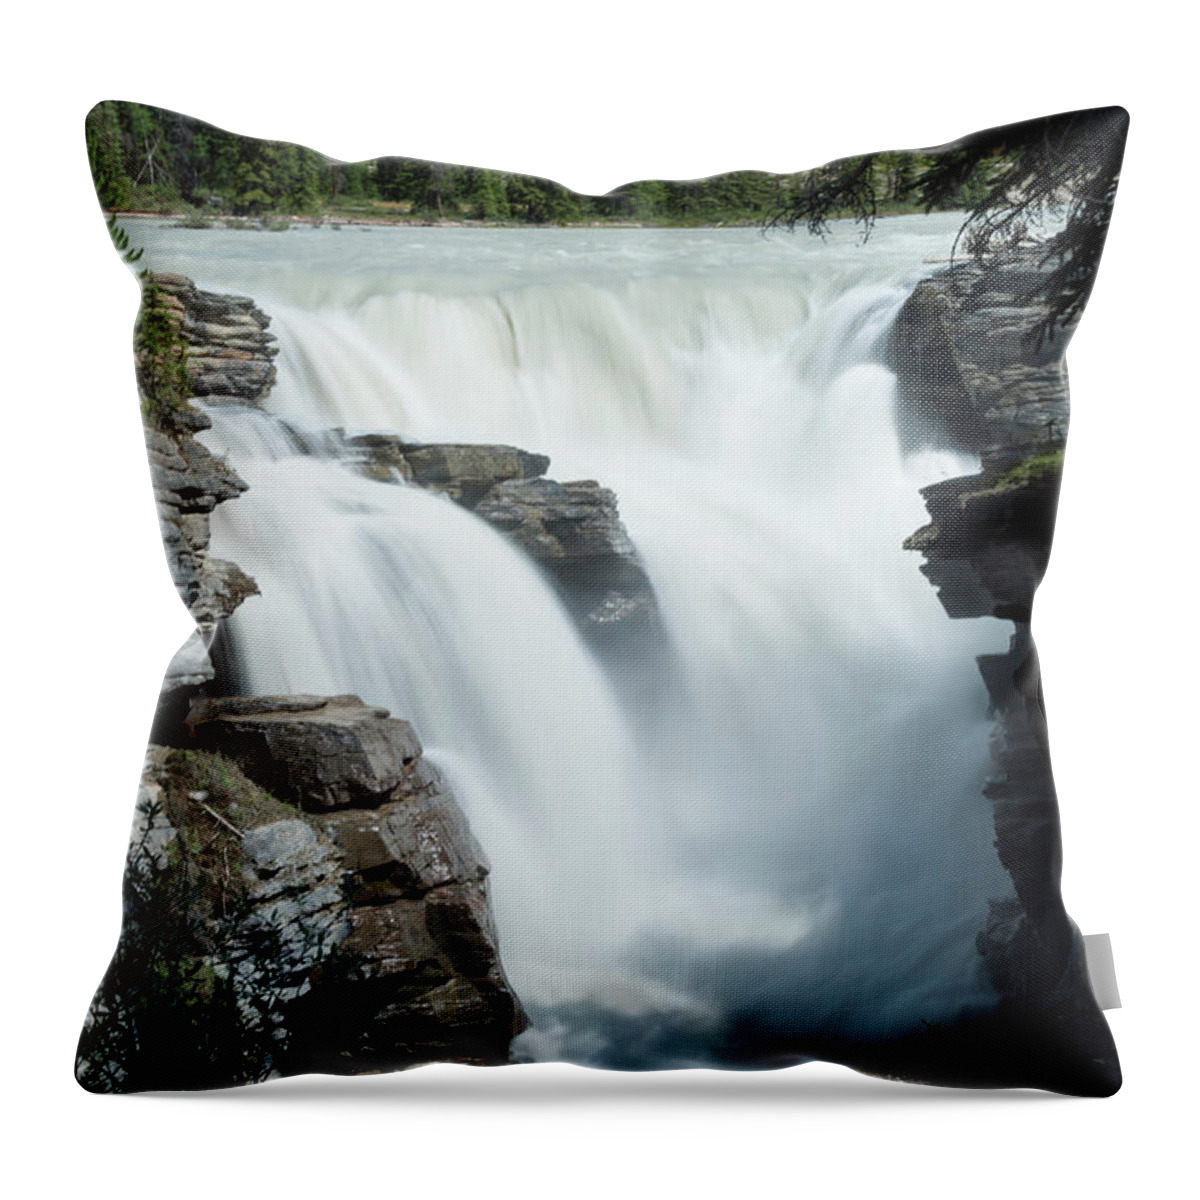 Tranquility Throw Pillow featuring the photograph Icefields Parkway, Athabasca Falls #2 by John Elk Iii